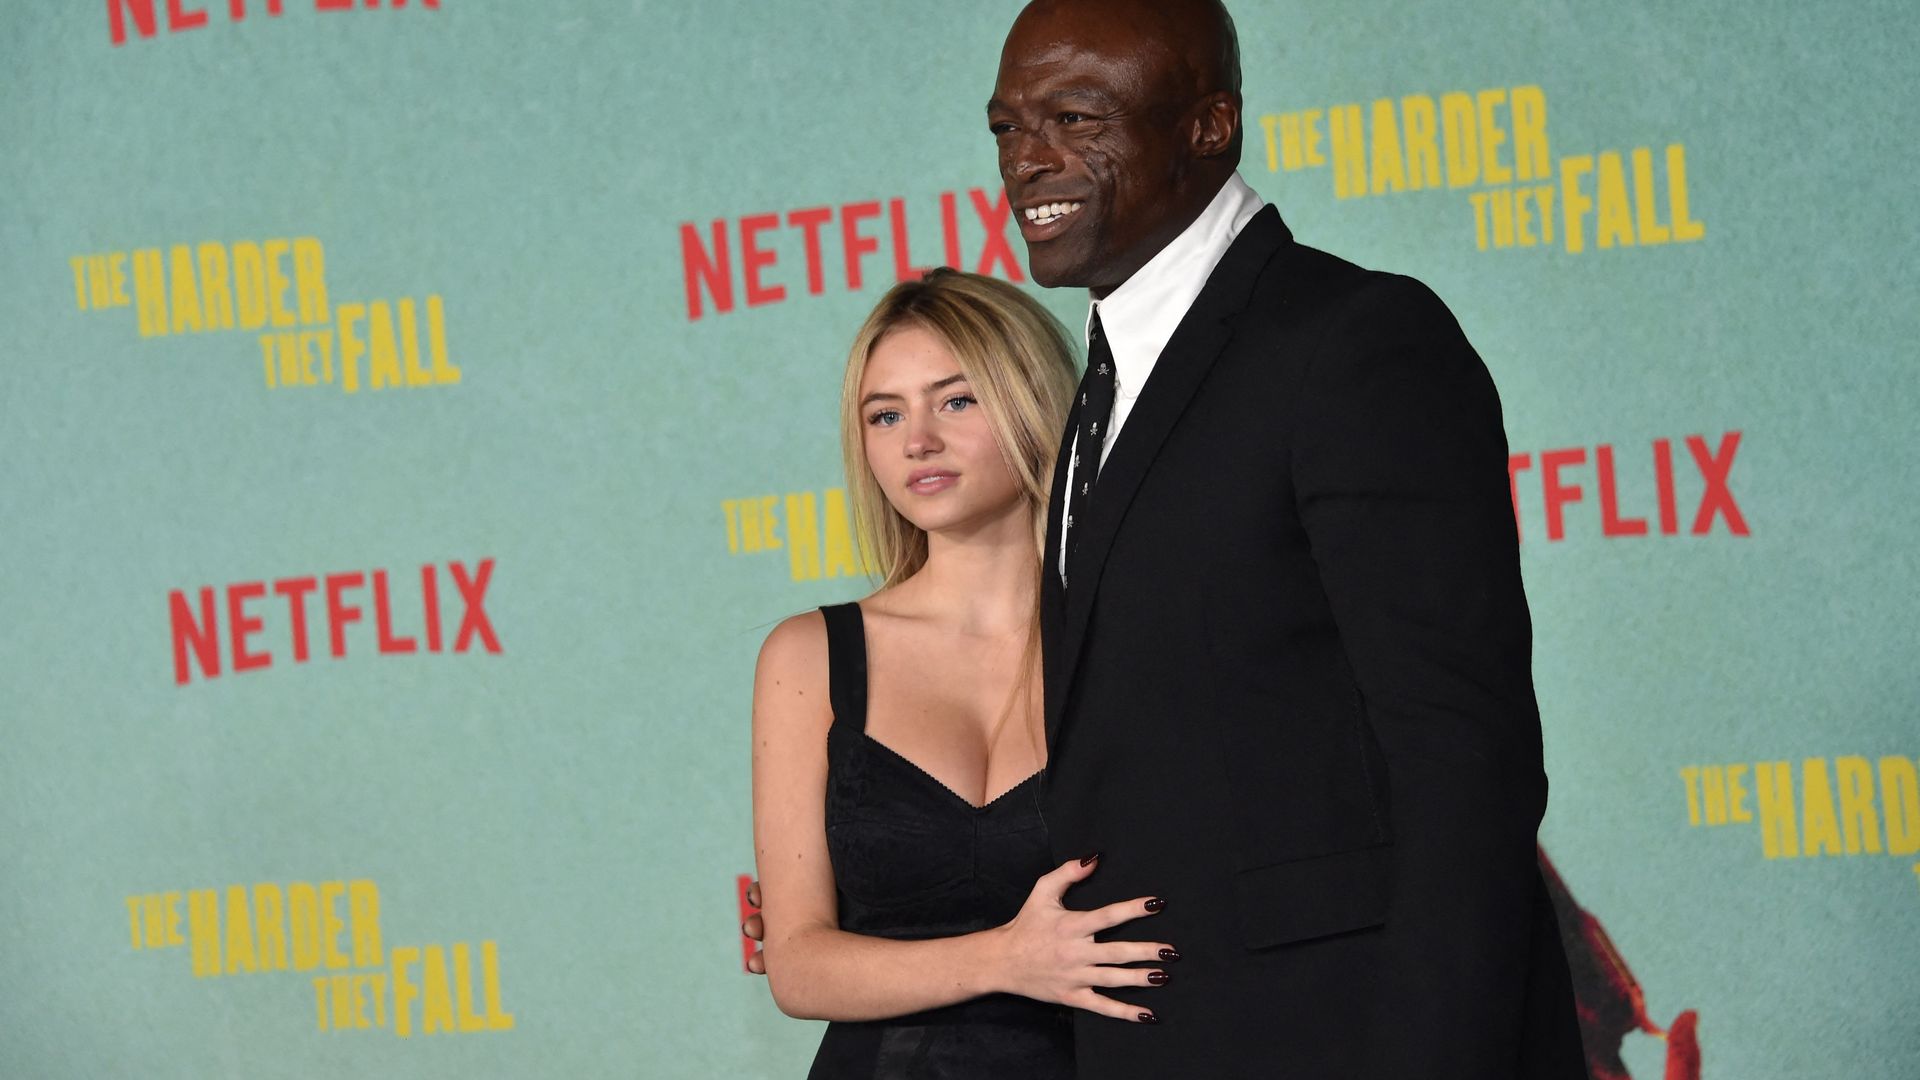 TOPSHOT - British singer Seal (R) and US model Leni Olumi Klum arrive for the Los Angeles Special Screening of Netflix's "The Harder They Fall" at the Shrine Auditorium in Los Angeles, October 13, 2021. (Photo by Chris DELMAS / AFP) (Photo by CHRIS DELMAS/AFP via Getty Images)